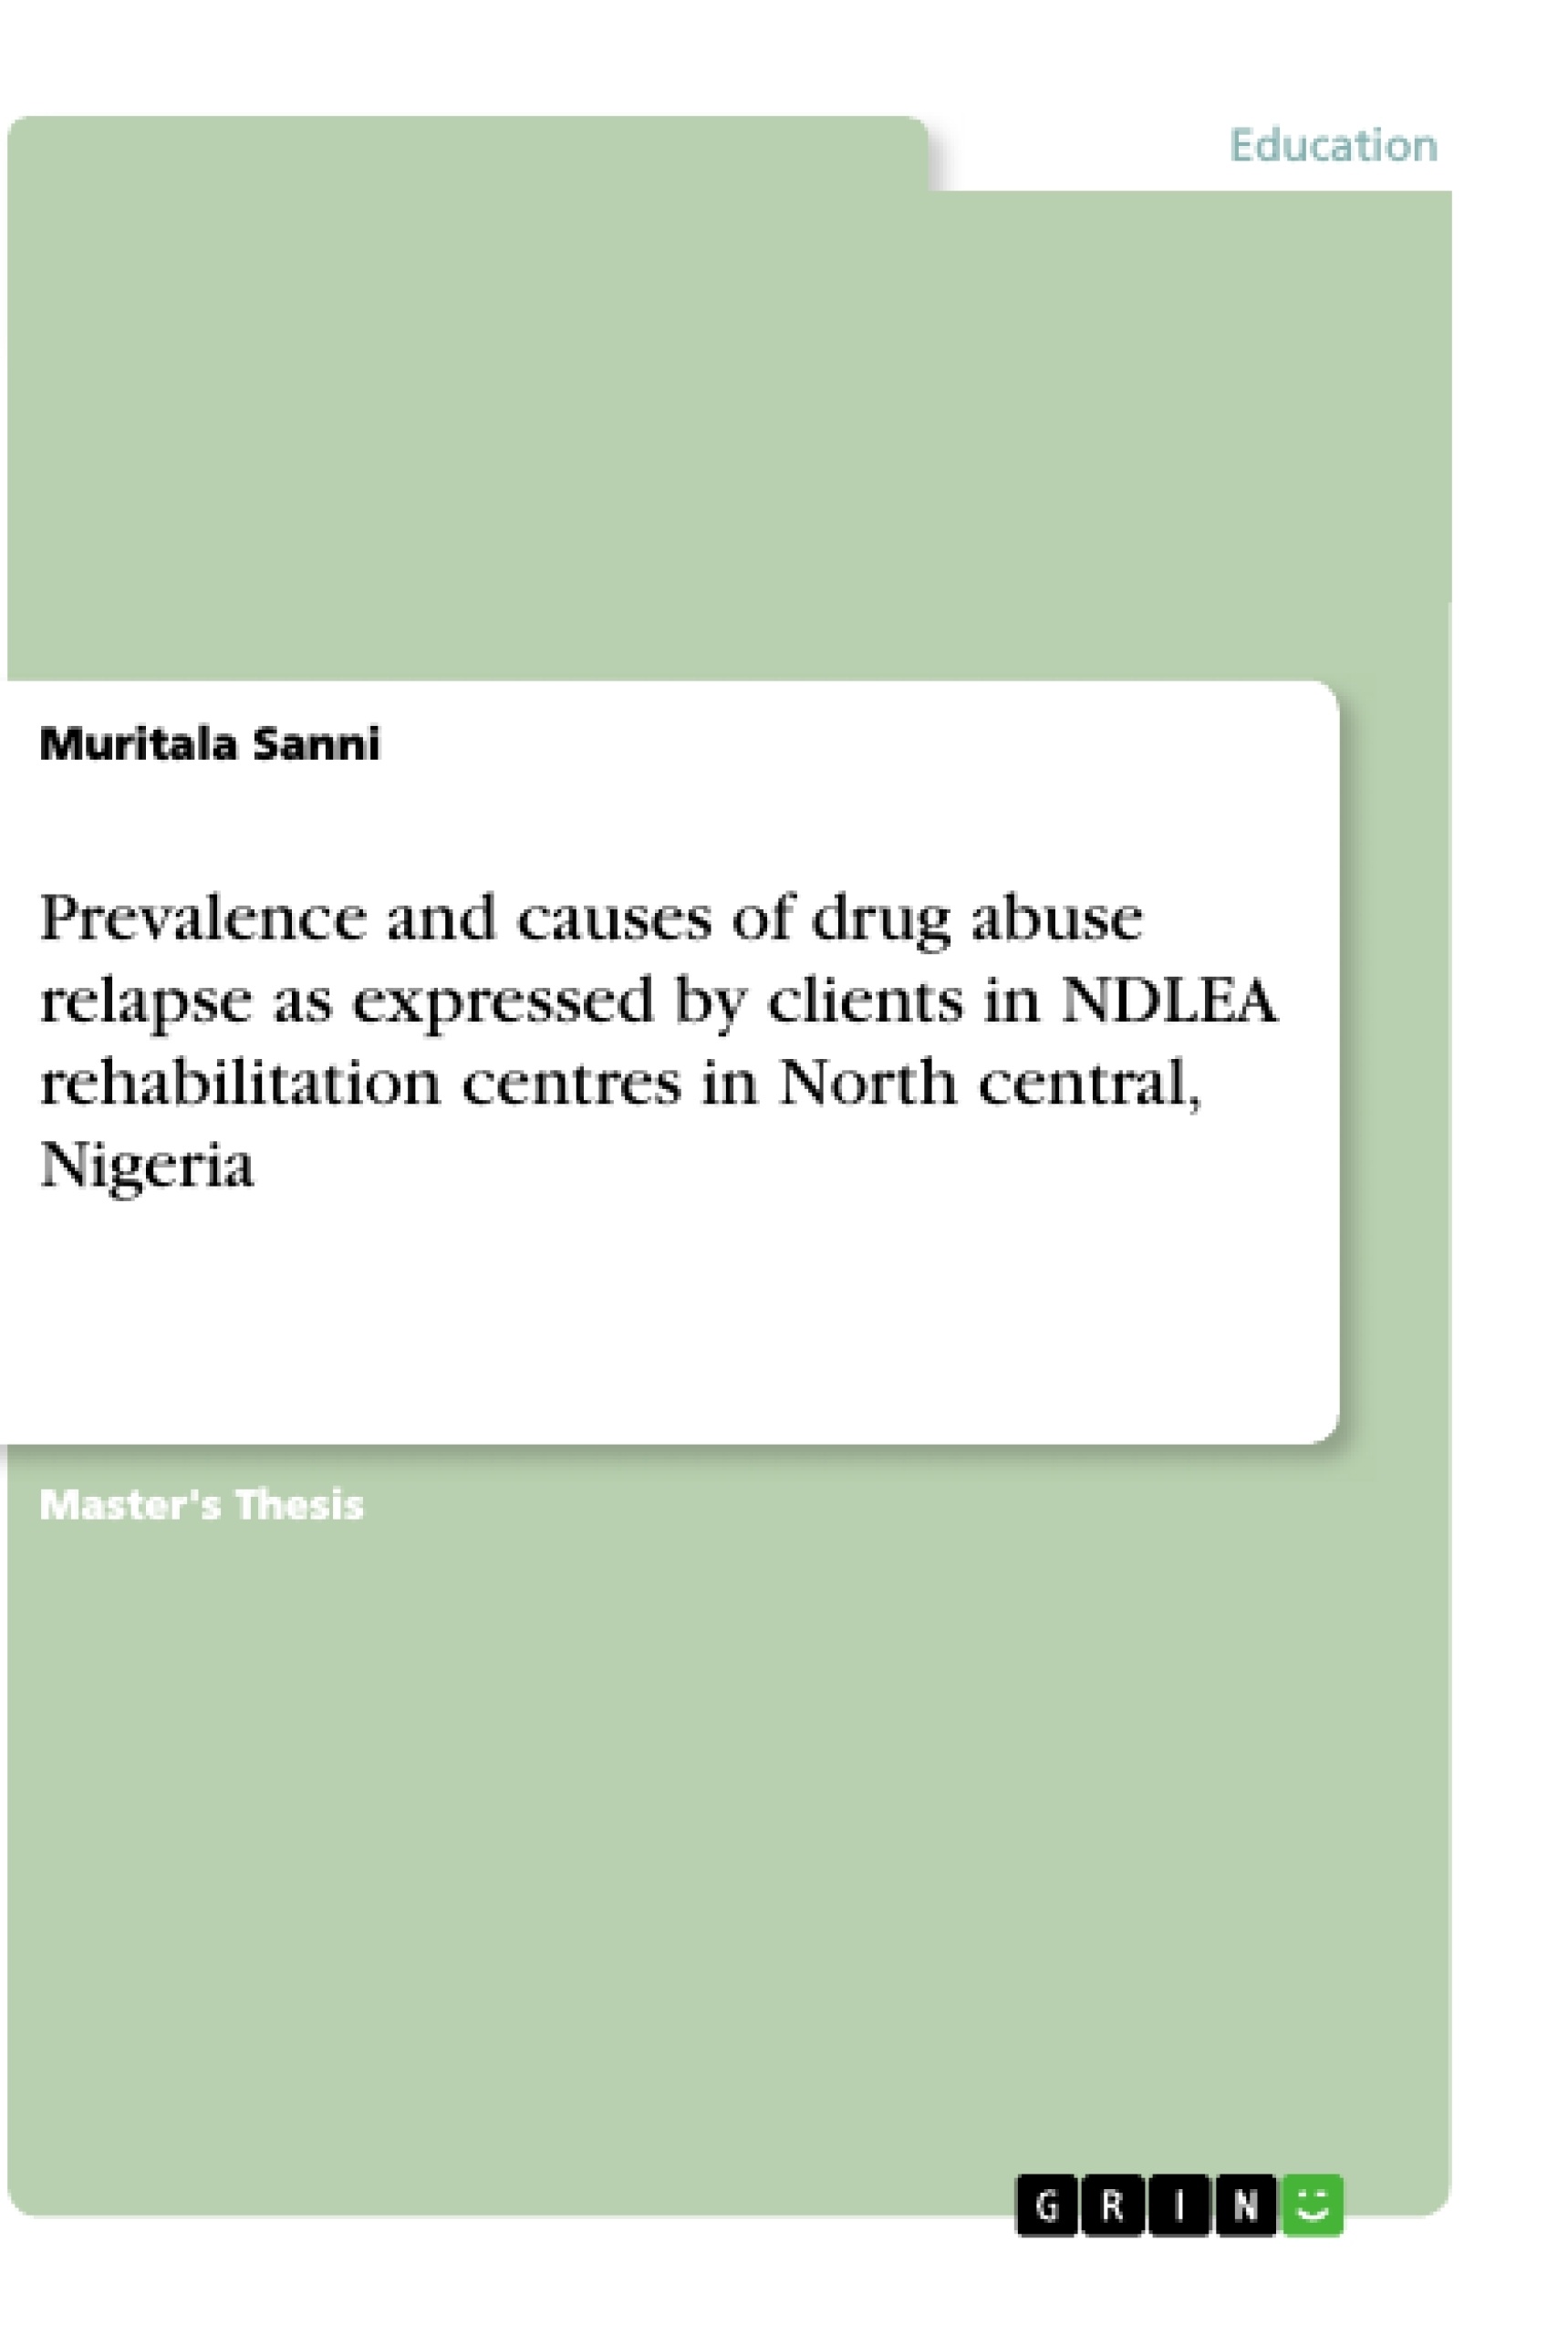 Título: Prevalence and causes of drug abuse relapse as expressed by clients in NDLEA rehabilitation centres in North central, Nigeria